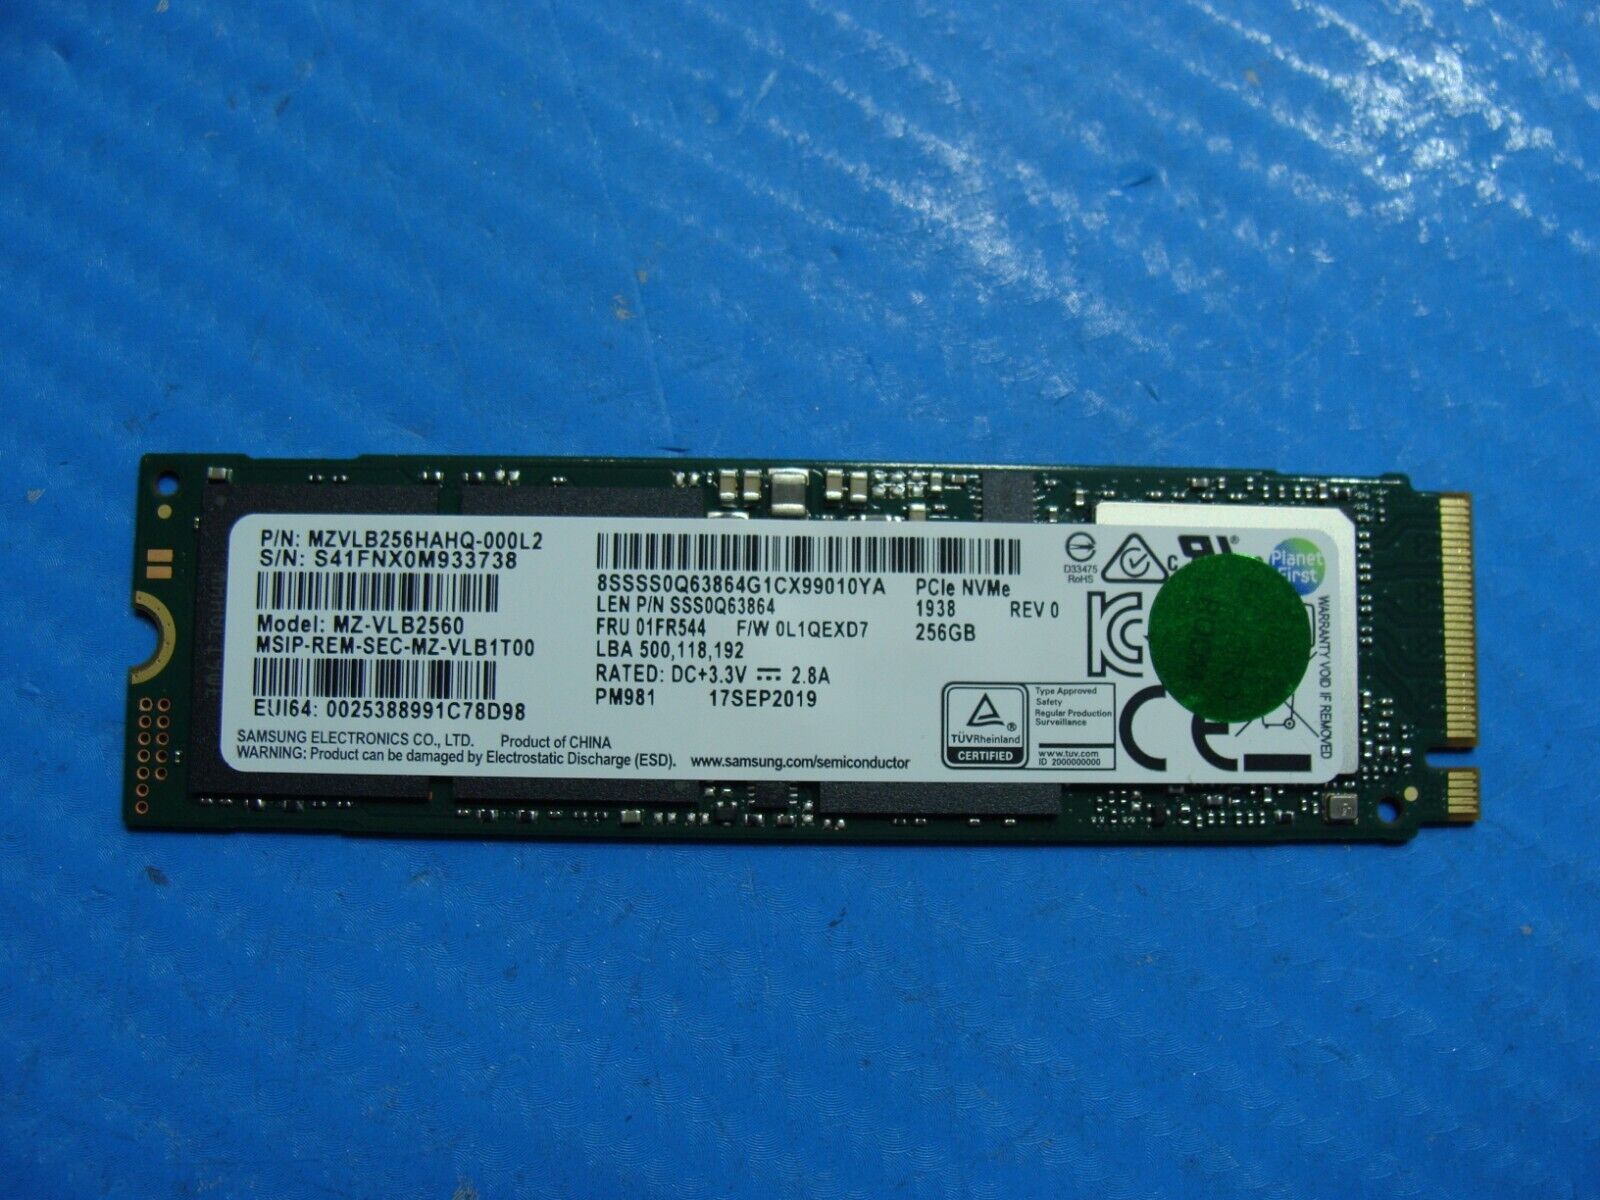 Lenovo S340-15IWL Samsung 256GB NVMe M.2 Solid State Drive MZVLB256HAHQ-000H1